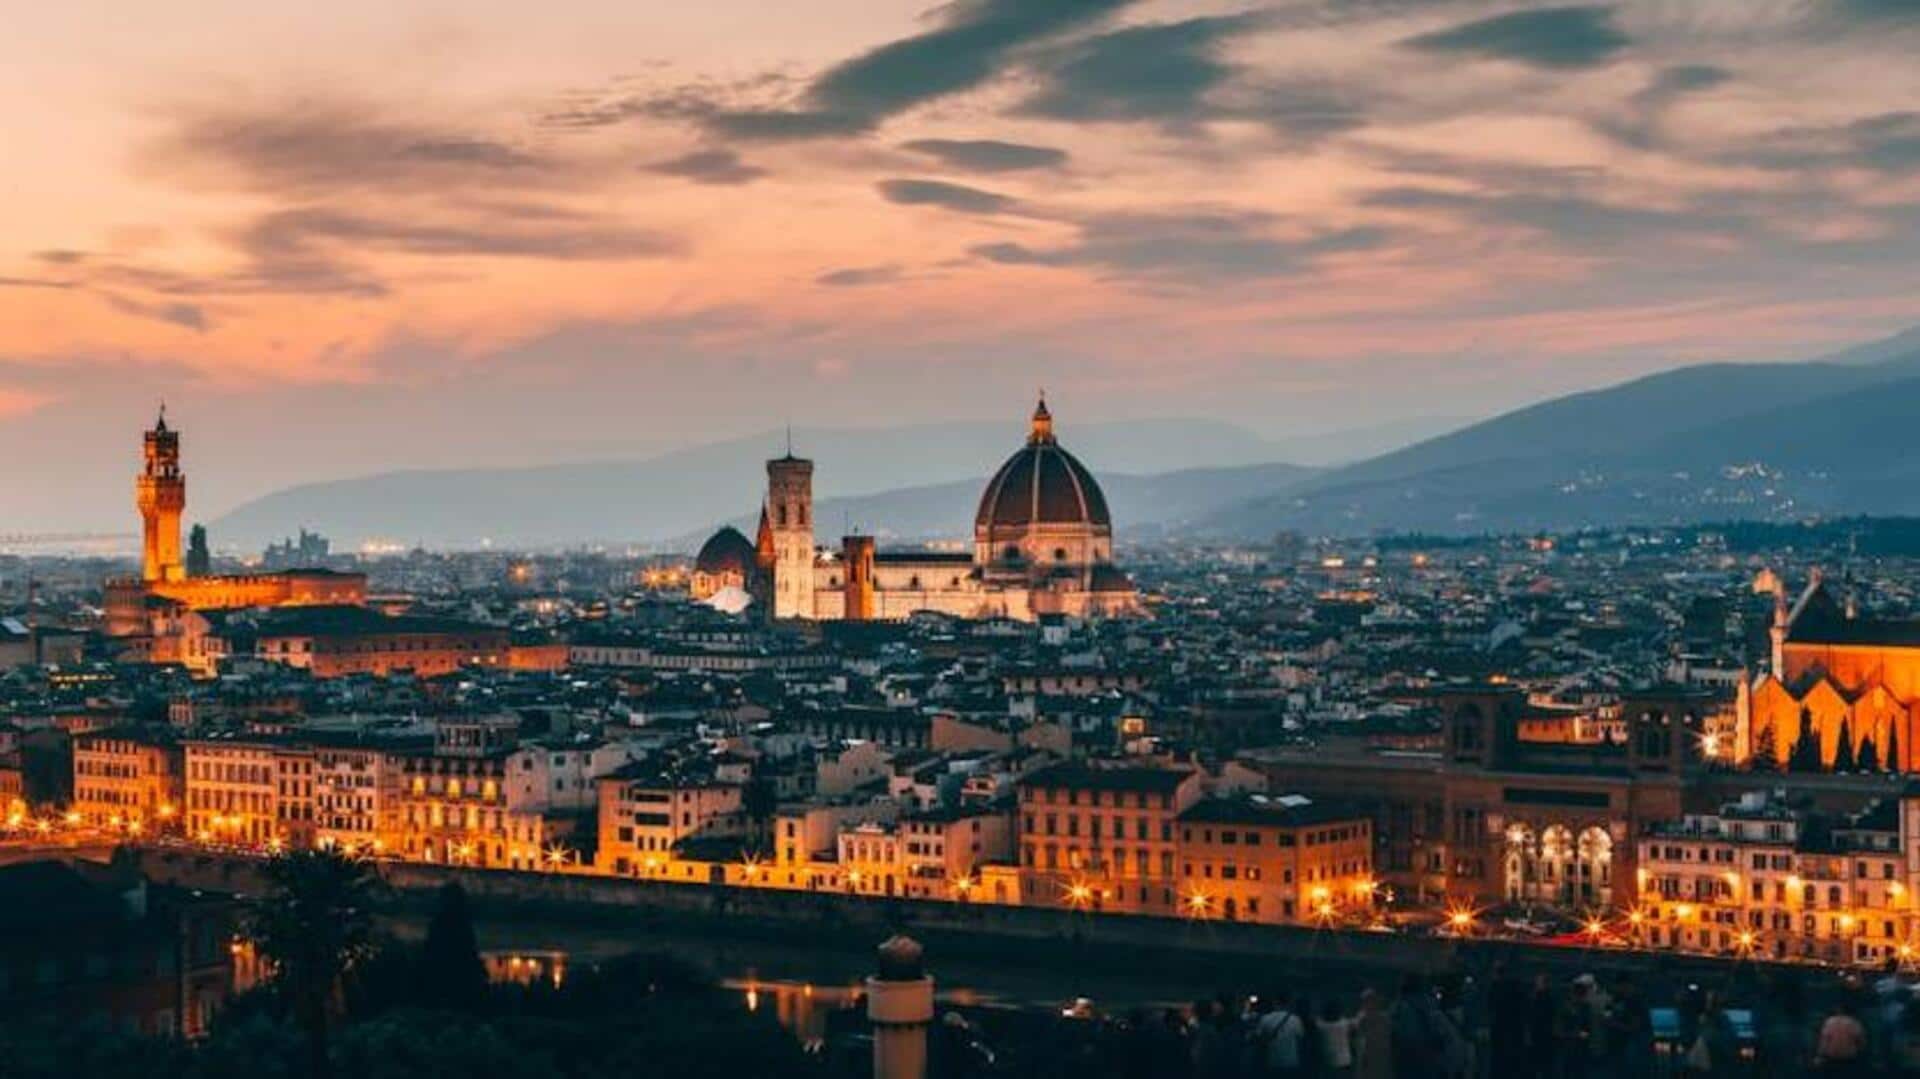 Take a journey through Renaissance art in Florence, Italy